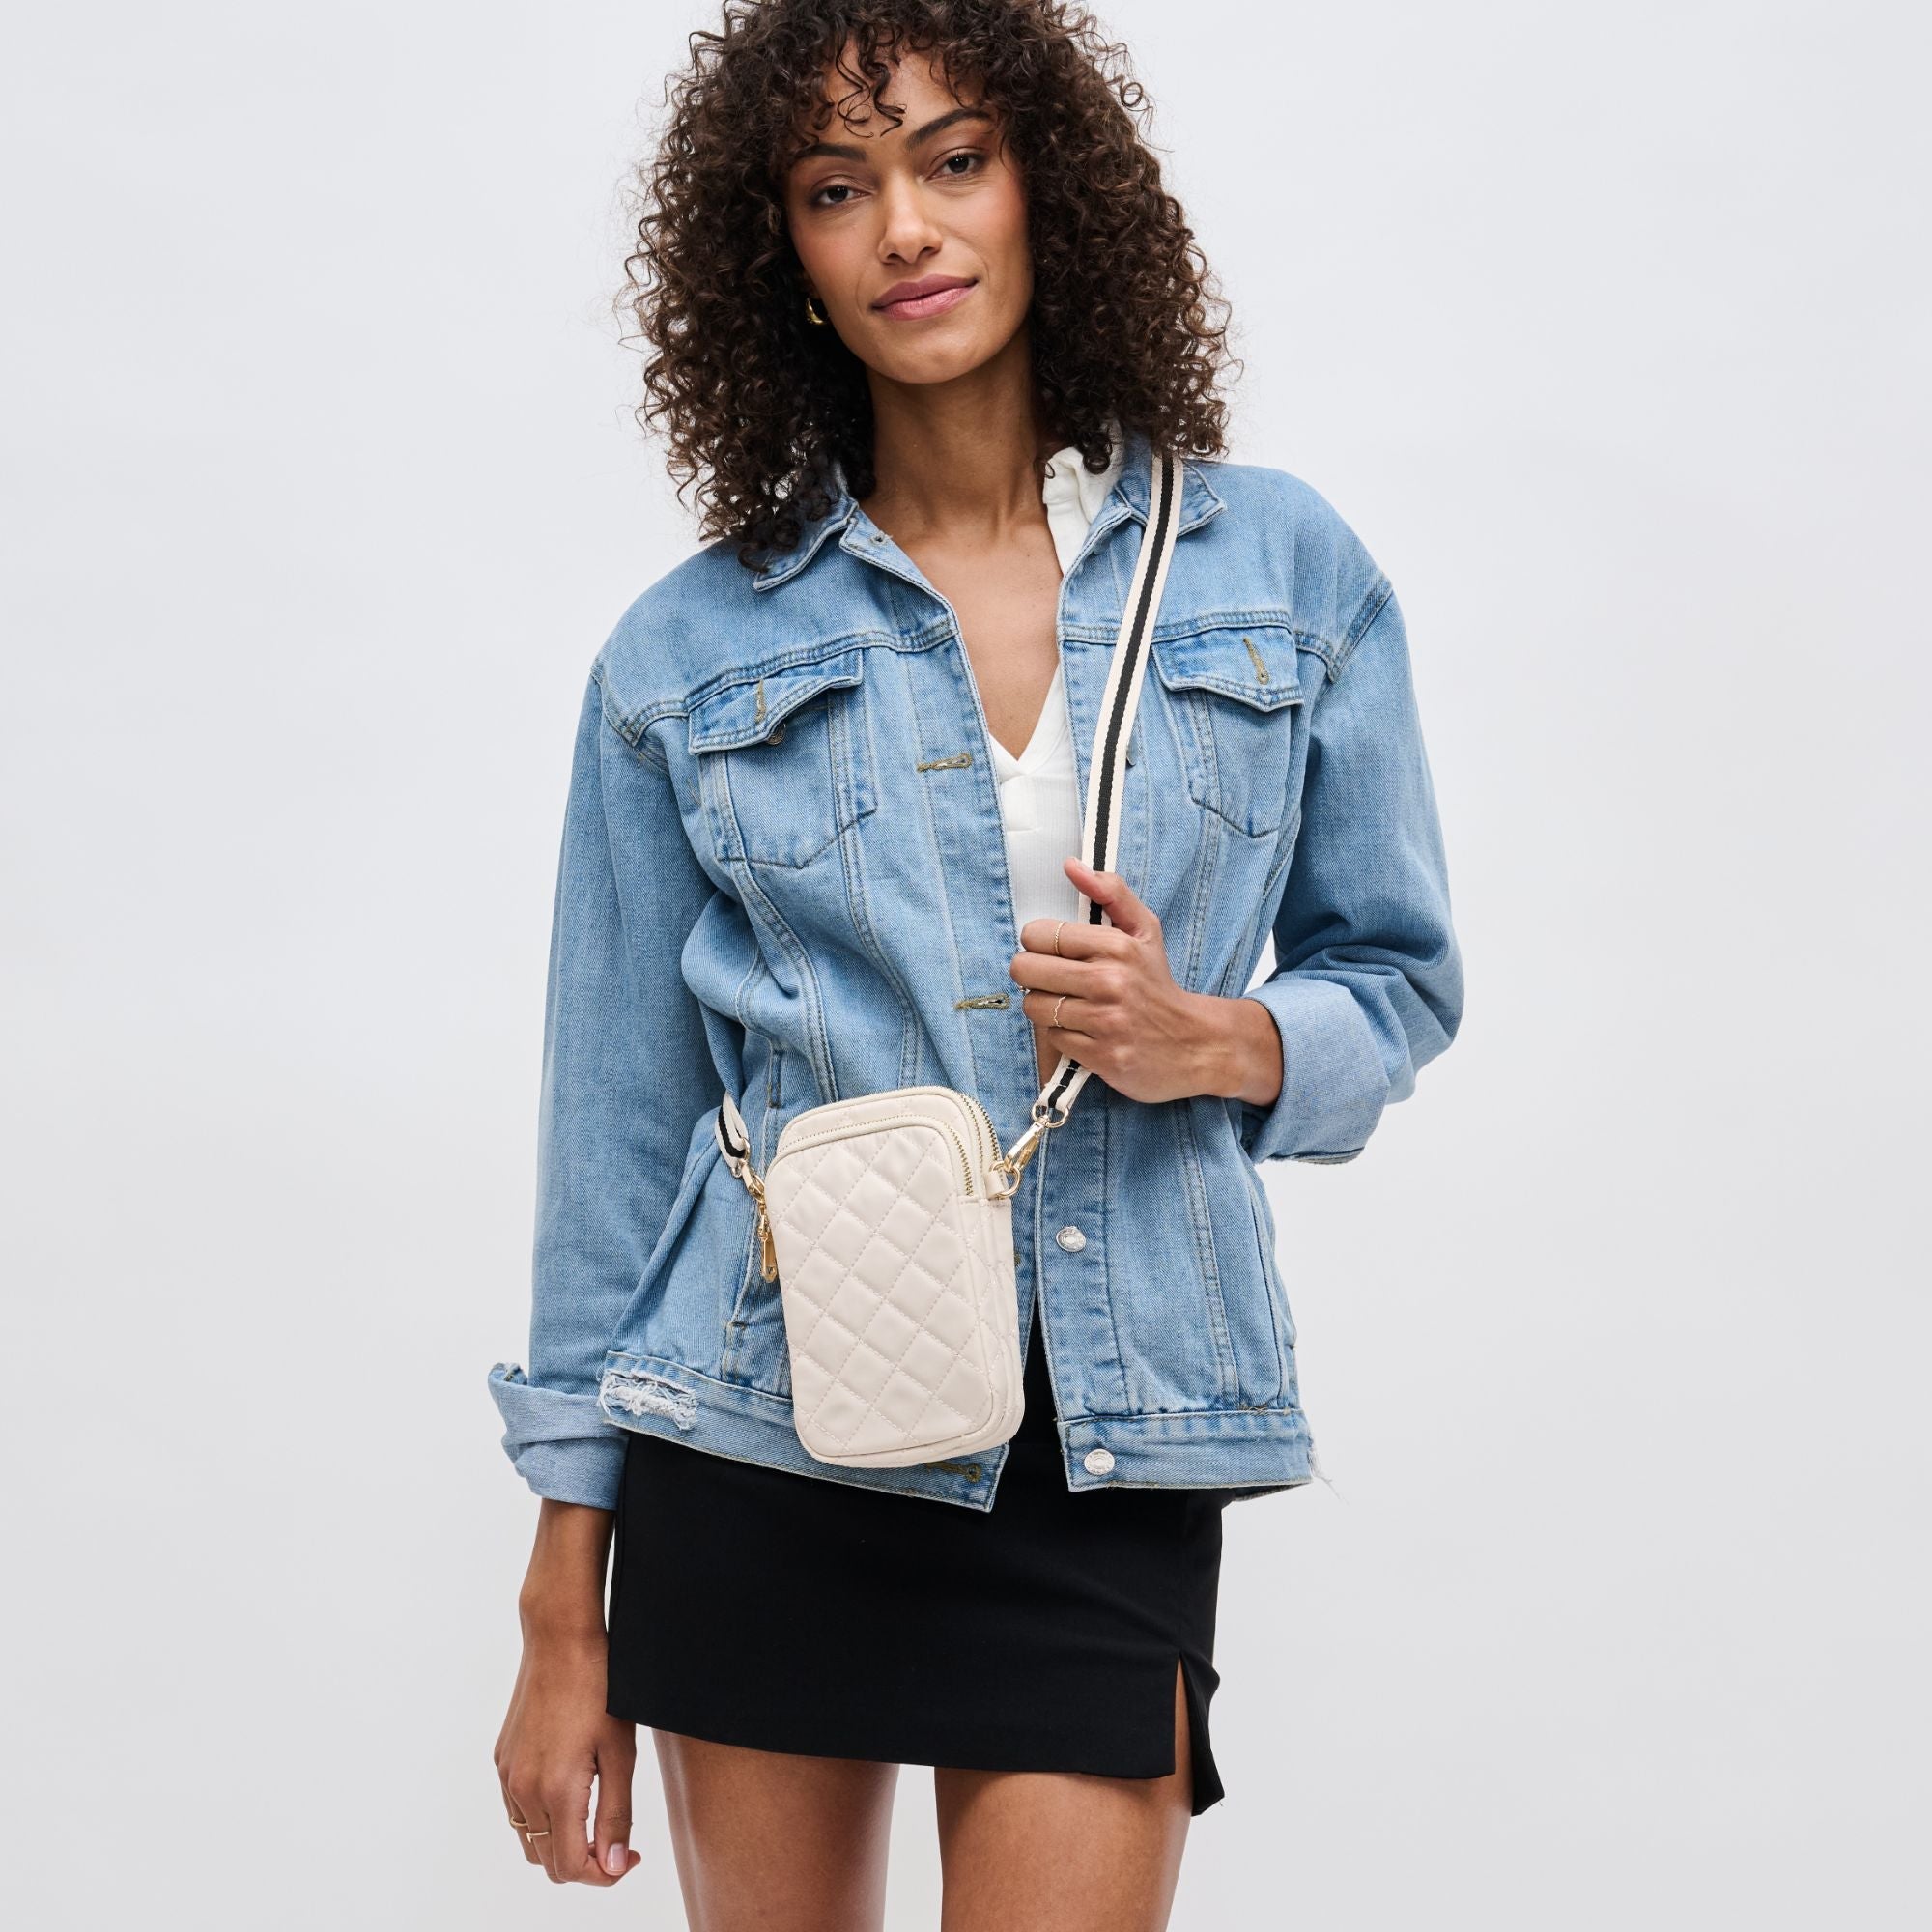 a model in a denim jacket carrying a white crossbody phone bag